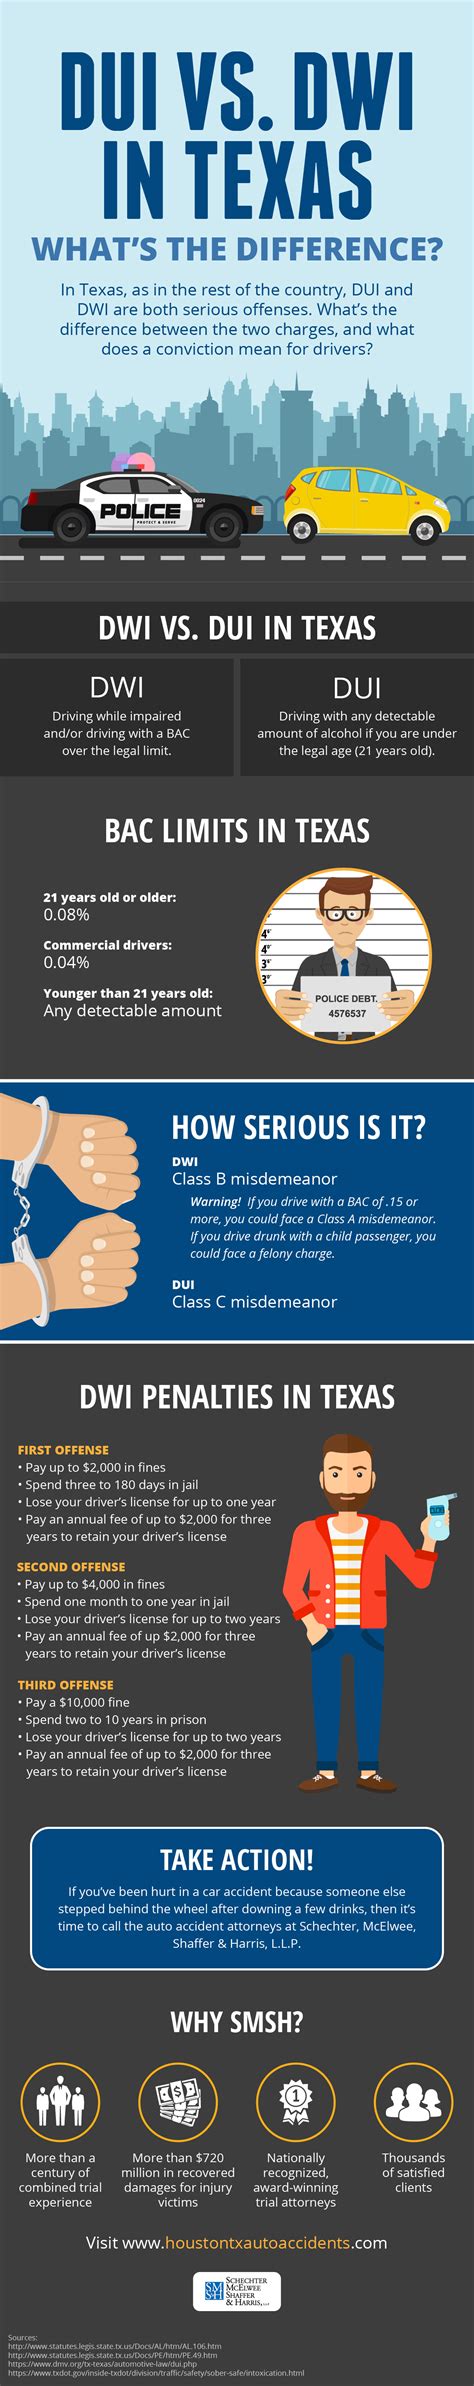 distinction between dwi 1st and dwi second in texas